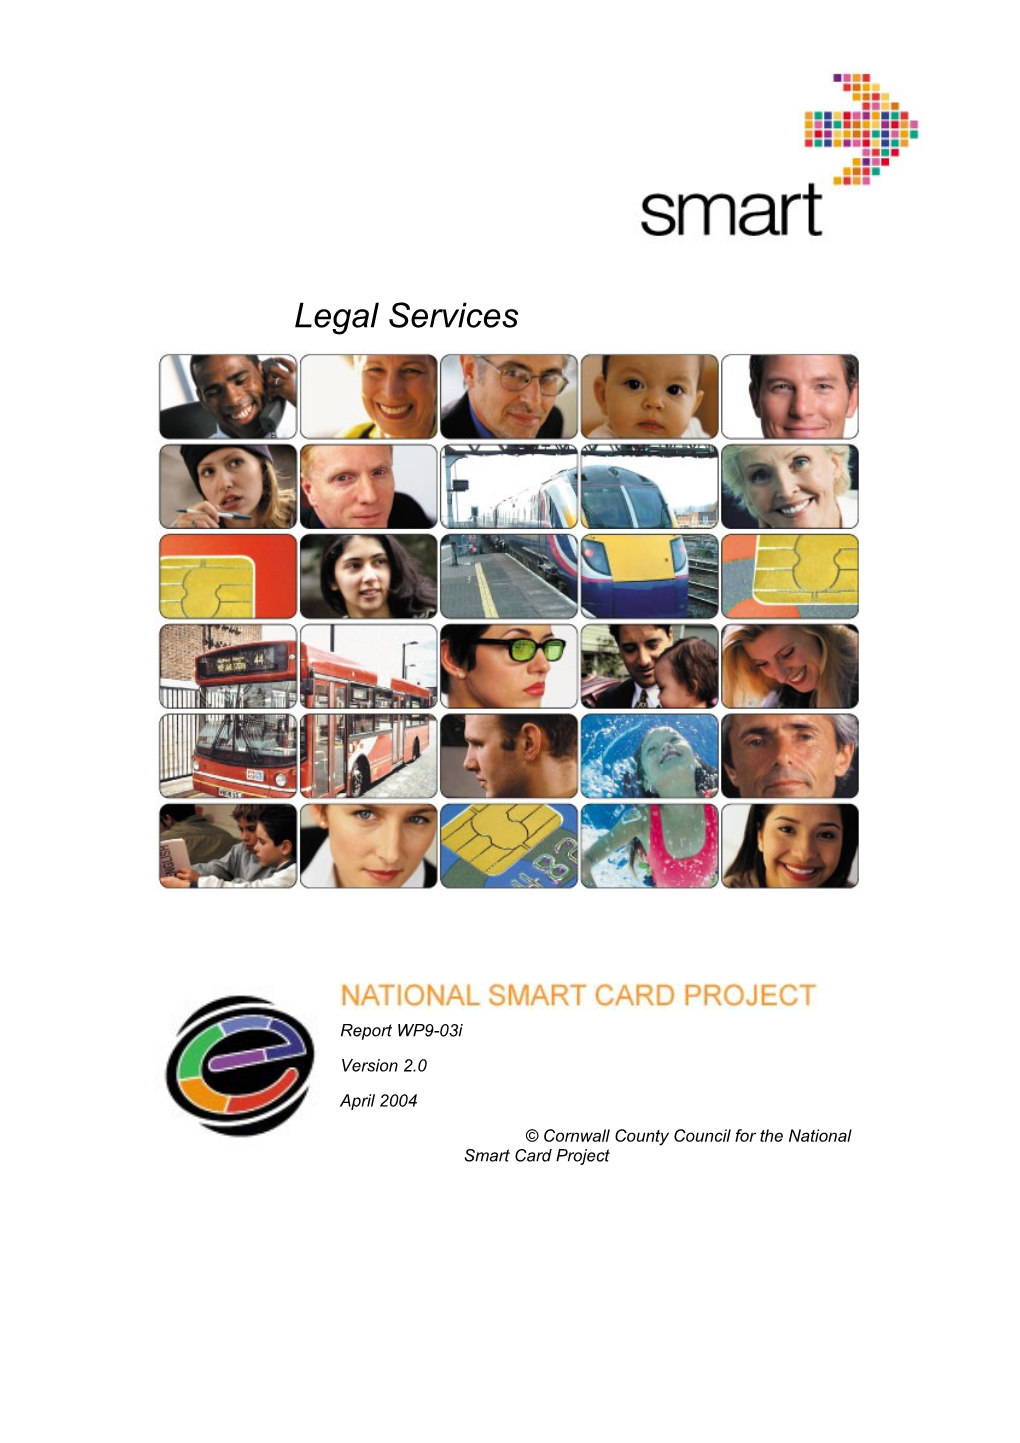 Cornwall County Council for the National Smart Card Project